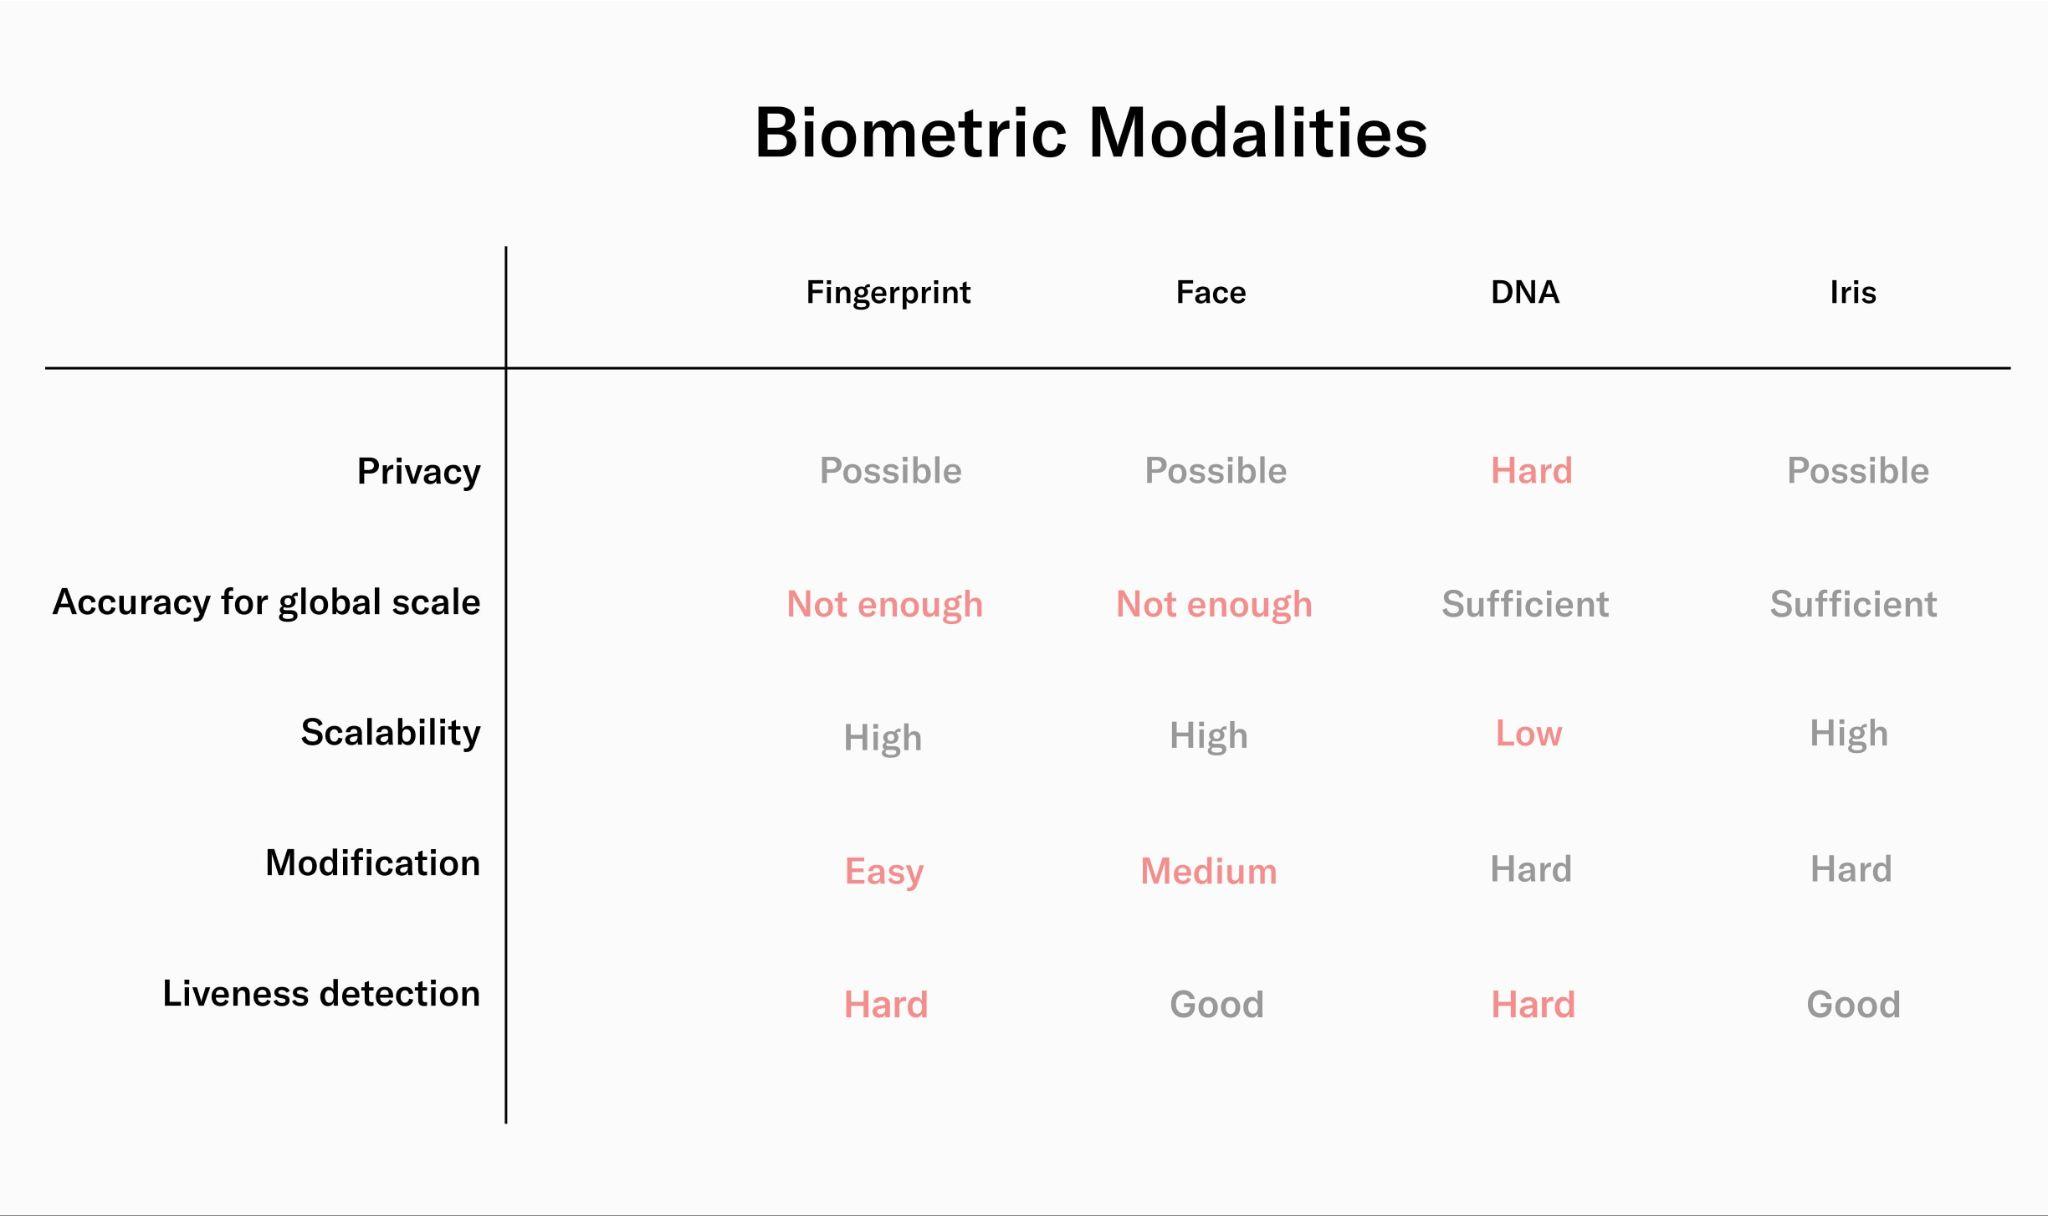 Figure 6: An overview of different biometrics modalities reveals that iris biometrics is the only modality that can fulfill all essential requirements. While each modality has its advantages and disadvantages, iris biometrics stands out as the most reliable and accurate method for verification of humanness and uniqueness on a global scale.